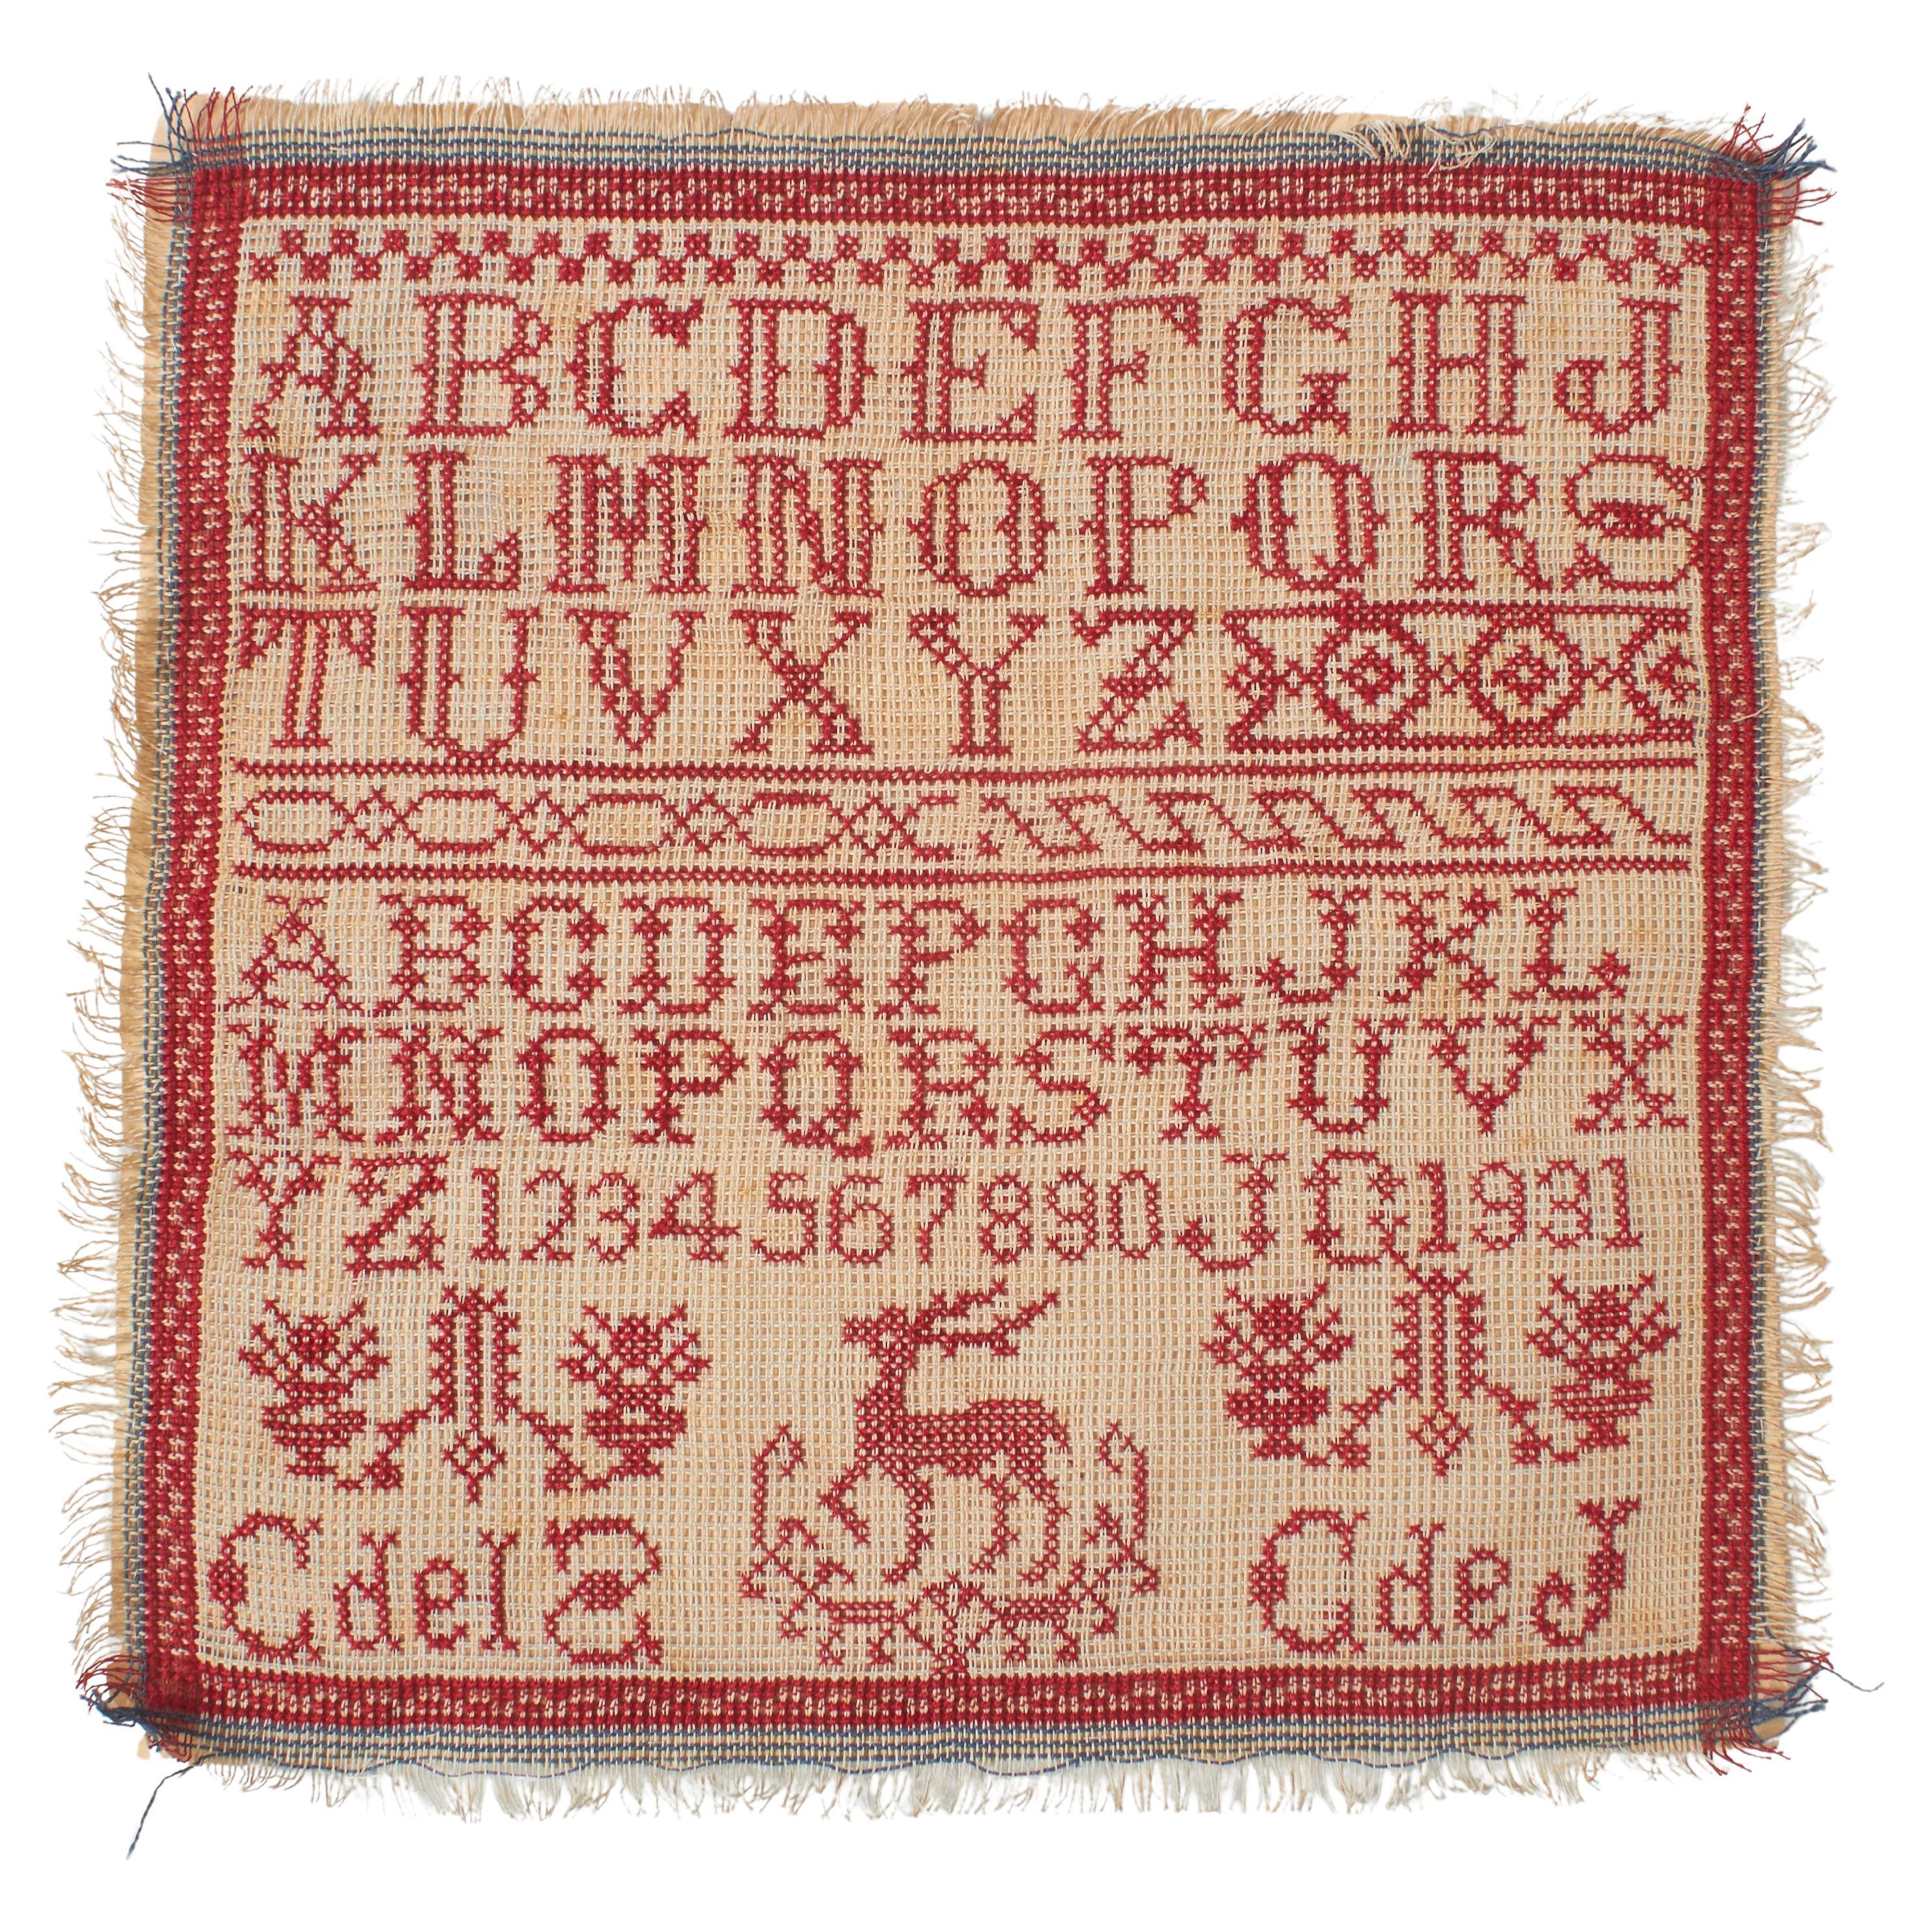 Vintage 20th Century Red and White Cross-Stitch Sampler with Alphabet & Numbers For Sale